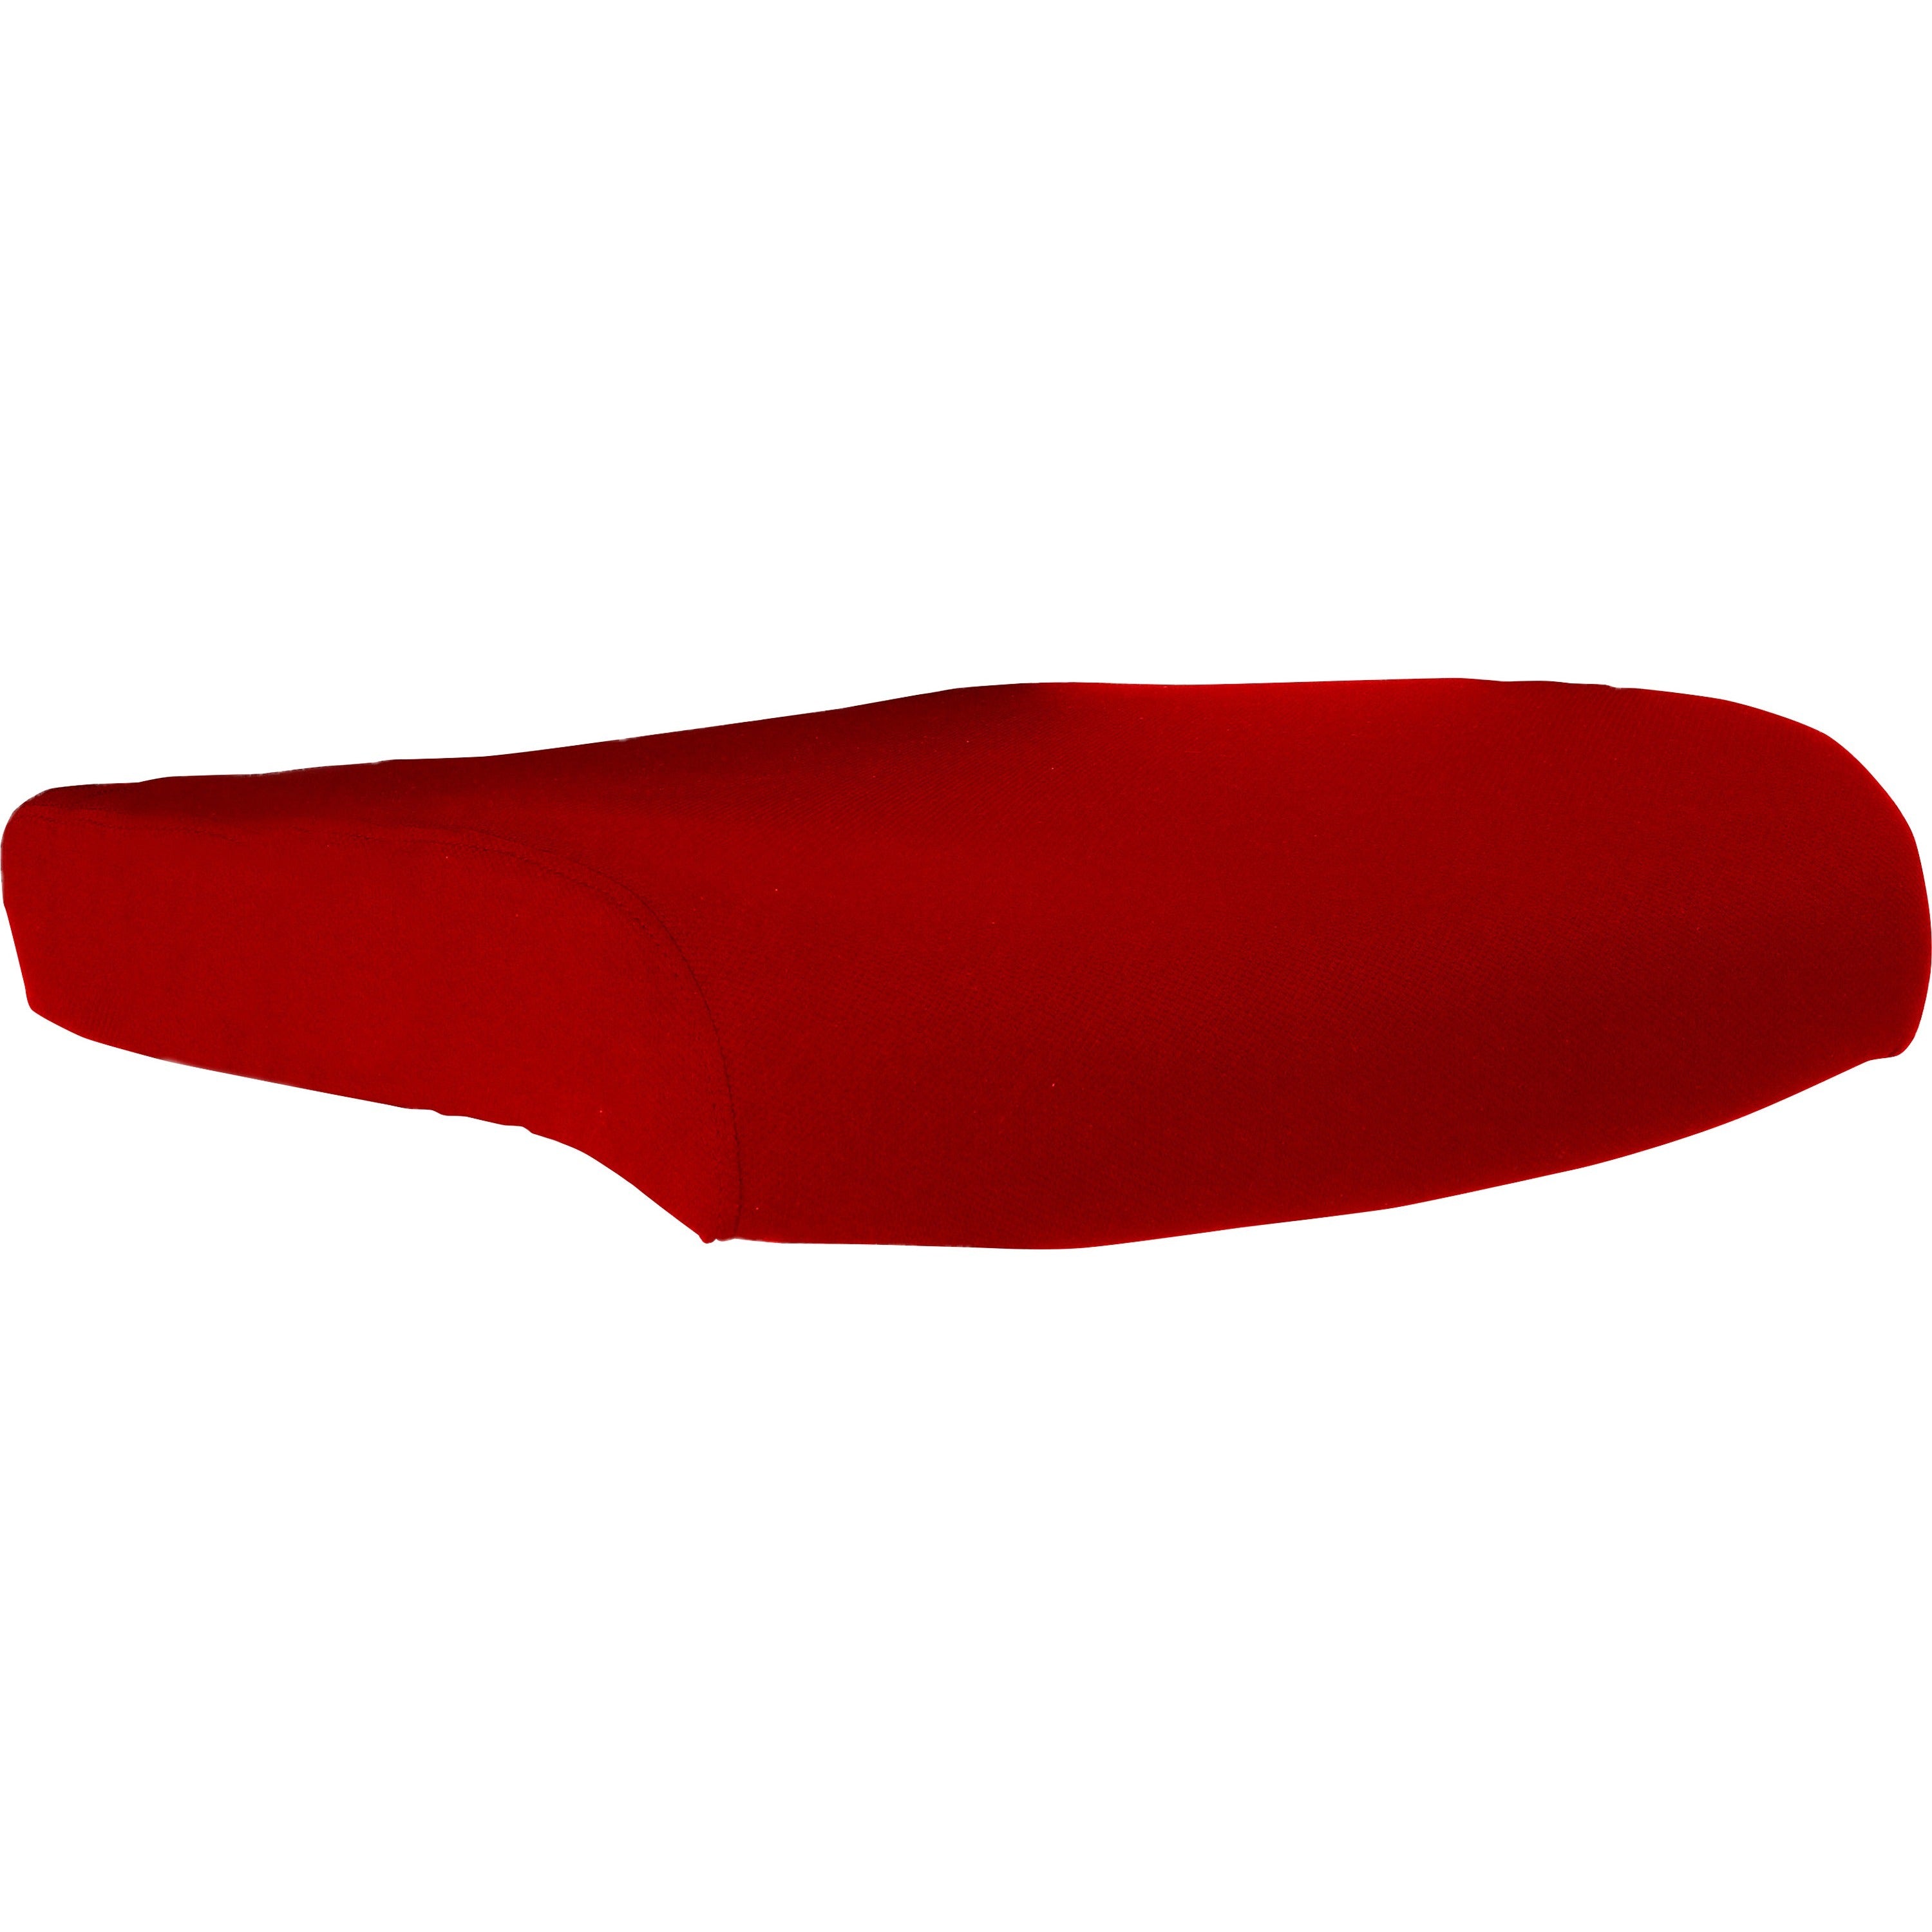 lorell-removable-mesh-seat-cover-19-length-x-19-width-polyester-mesh-red-1-each_llr00591 - 1